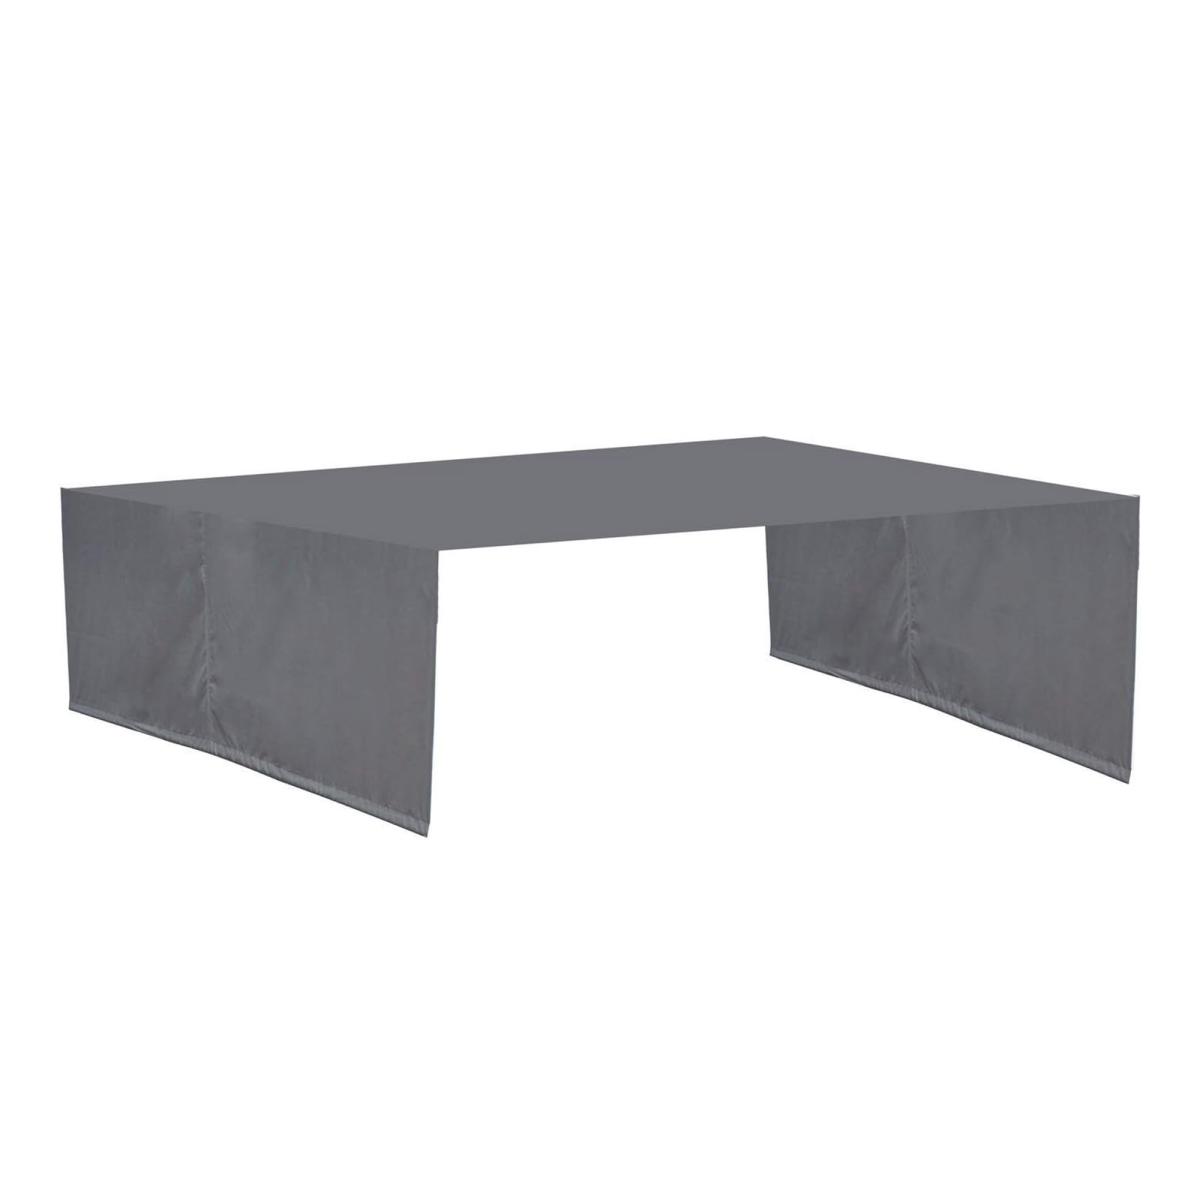 Universal Canopy Cover Replacement for 12x9 Ft Curved Outdoor Pergola Structure-grey